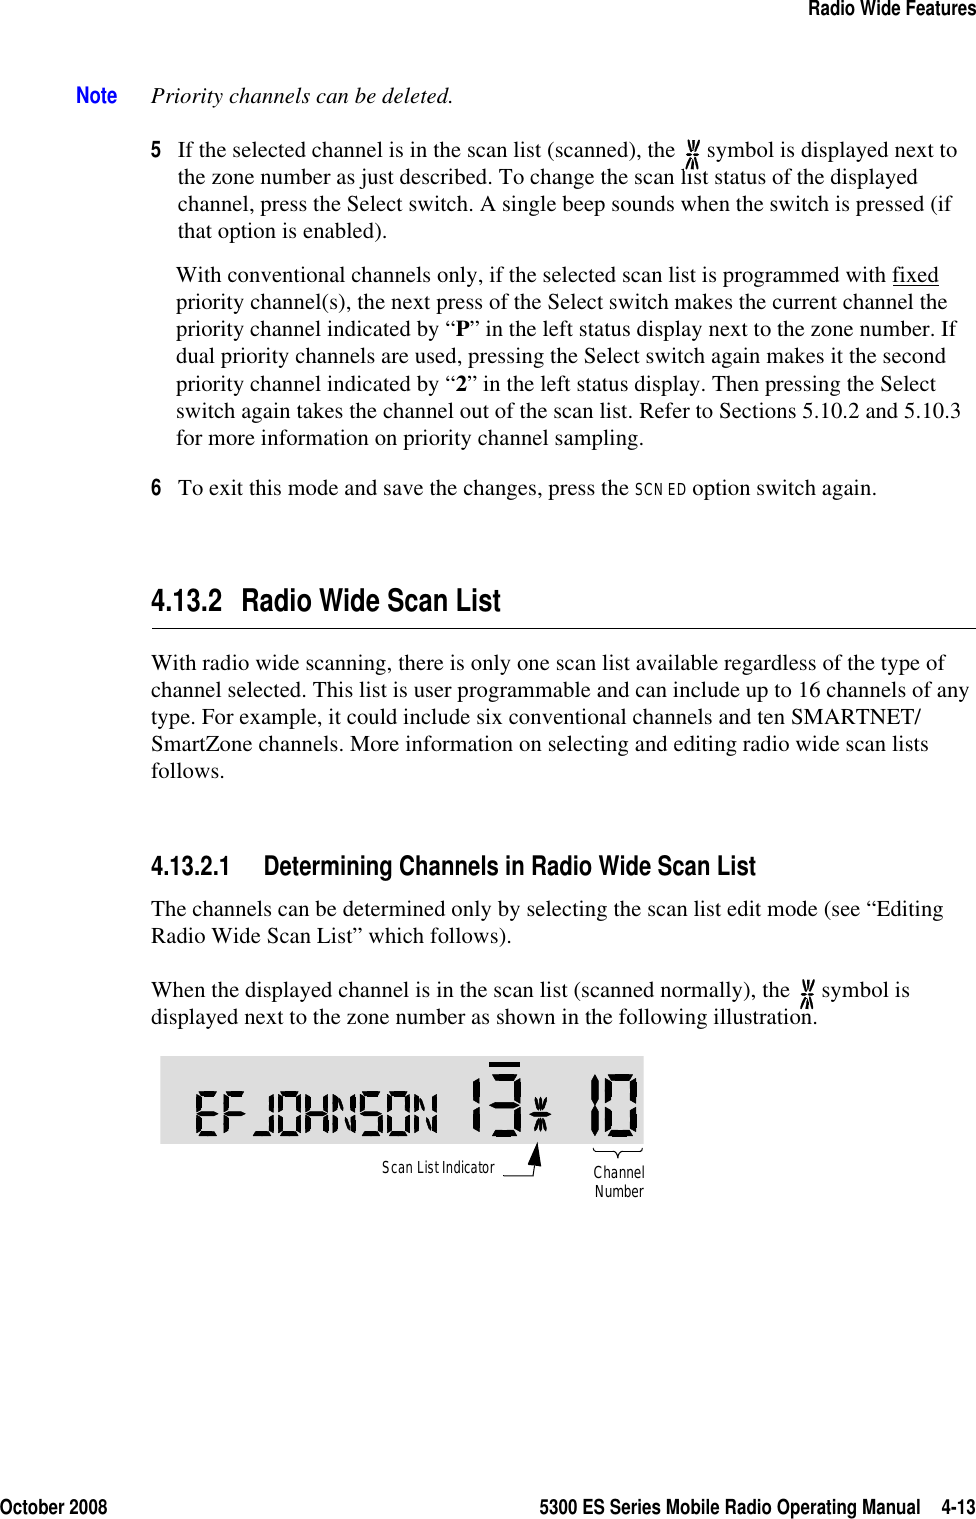 October 2008 5300 ES Series Mobile Radio Operating Manual 4-13Radio Wide FeaturesNote Priority channels can be deleted.5If the selected channel is in the scan list (scanned), the   symbol is displayed next to the zone number as just described. To change the scan list status of the displayed channel, press the Select switch. A single beep sounds when the switch is pressed (if that option is enabled). With conventional channels only, if the selected scan list is programmed with fixed priority channel(s), the next press of the Select switch makes the current channel the priority channel indicated by “P” in the left status display next to the zone number. If dual priority channels are used, pressing the Select switch again makes it the second priority channel indicated by “2” in the left status display. Then pressing the Select switch again takes the channel out of the scan list. Refer to Sections 5.10.2 and 5.10.3 for more information on priority channel sampling.6To exit this mode and save the changes, press the SCN ED option switch again.4.13.2 Radio Wide Scan ListWith radio wide scanning, there is only one scan list available regardless of the type of channel selected. This list is user programmable and can include up to 16 channels of any type. For example, it could include six conventional channels and ten SMARTNET/SmartZone channels. More information on selecting and editing radio wide scan lists follows.4.13.2.1 Determining Channels in Radio Wide Scan ListThe channels can be determined only by selecting the scan list edit mode (see “Editing Radio Wide Scan List” which follows).When the displayed channel is in the scan list (scanned normally), the   symbol is displayed next to the zone number as shown in the following illustration.Scan List IndicatorChannelNumber